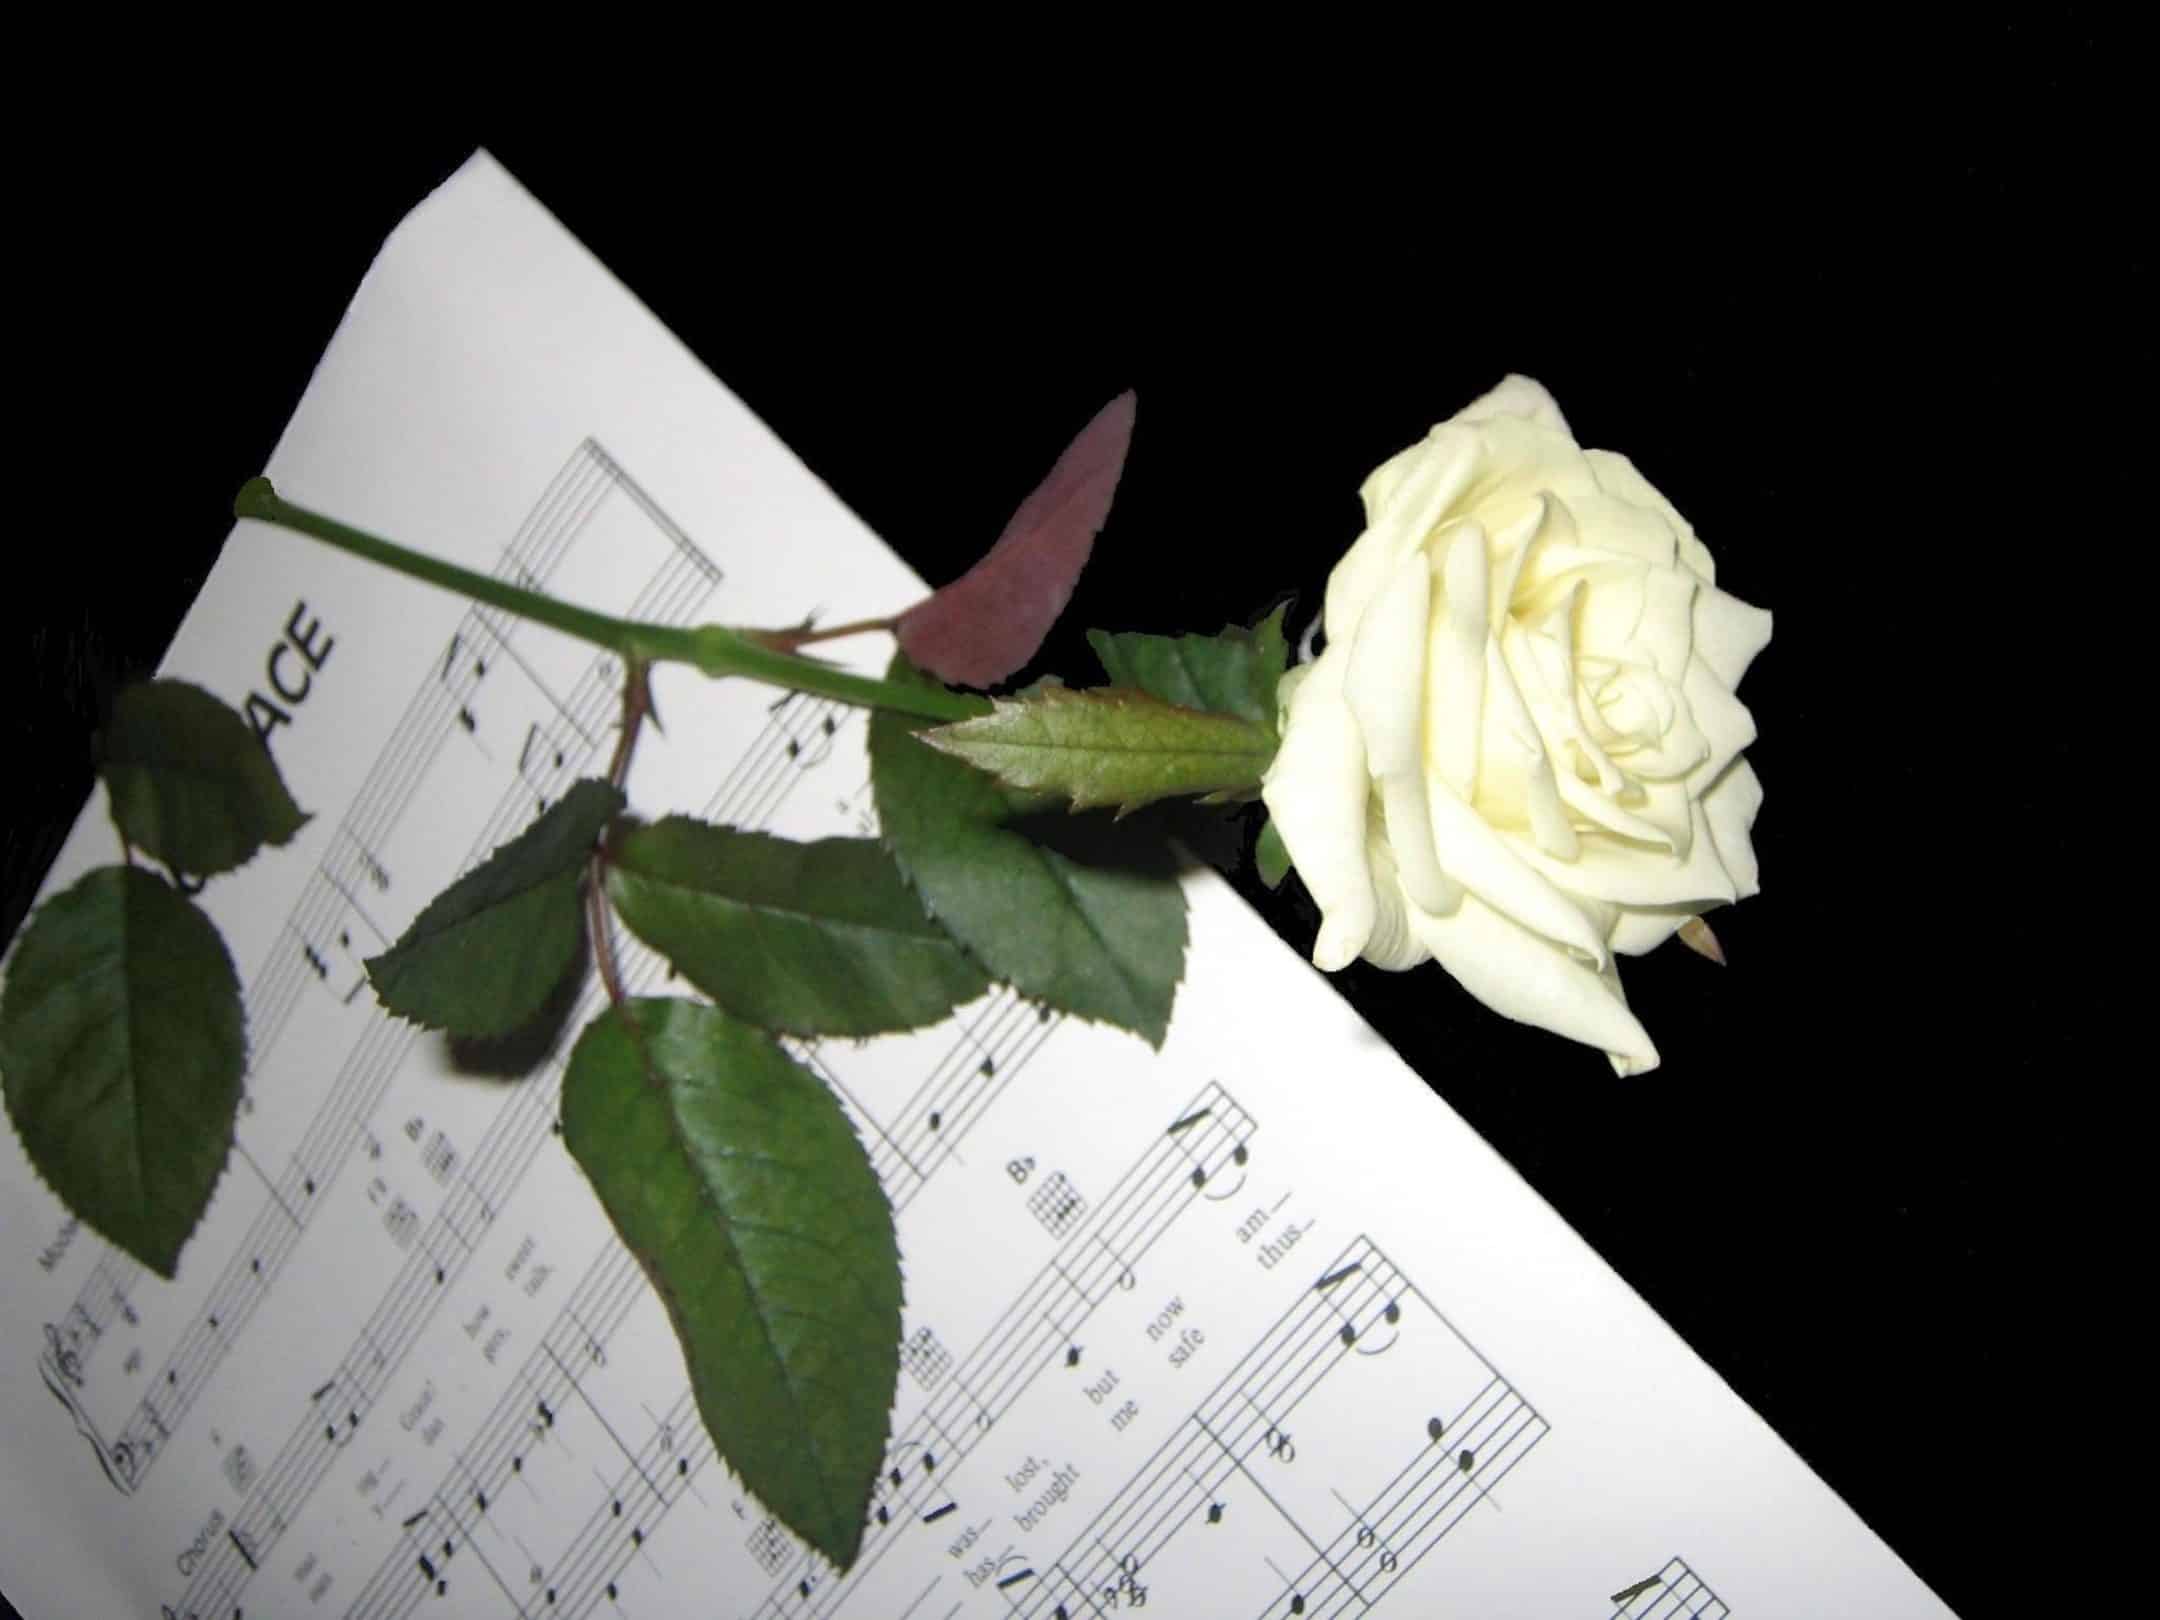 Hymn music and white rose